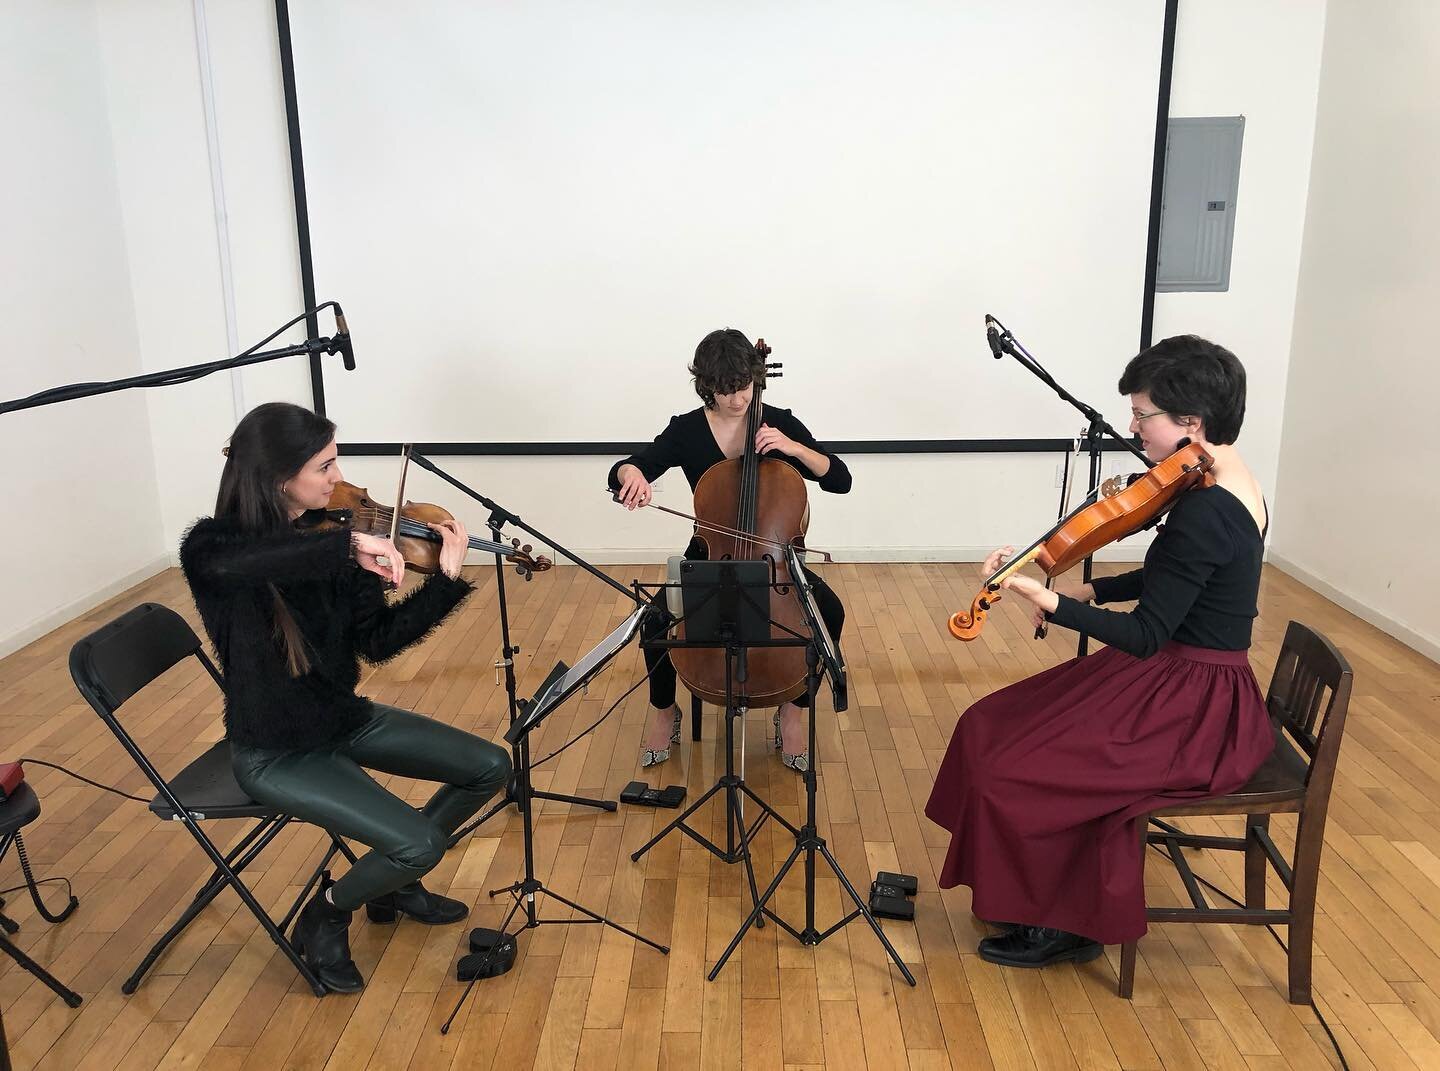 So nice to be back together in NY last month recording trios by Anthony R. Green and Finola Merivale with the help of Josh Henderson of @warptrio ! The full videos will be aired in June as part of @uncommonsoundcle , but stay tuned for sneak peeks an